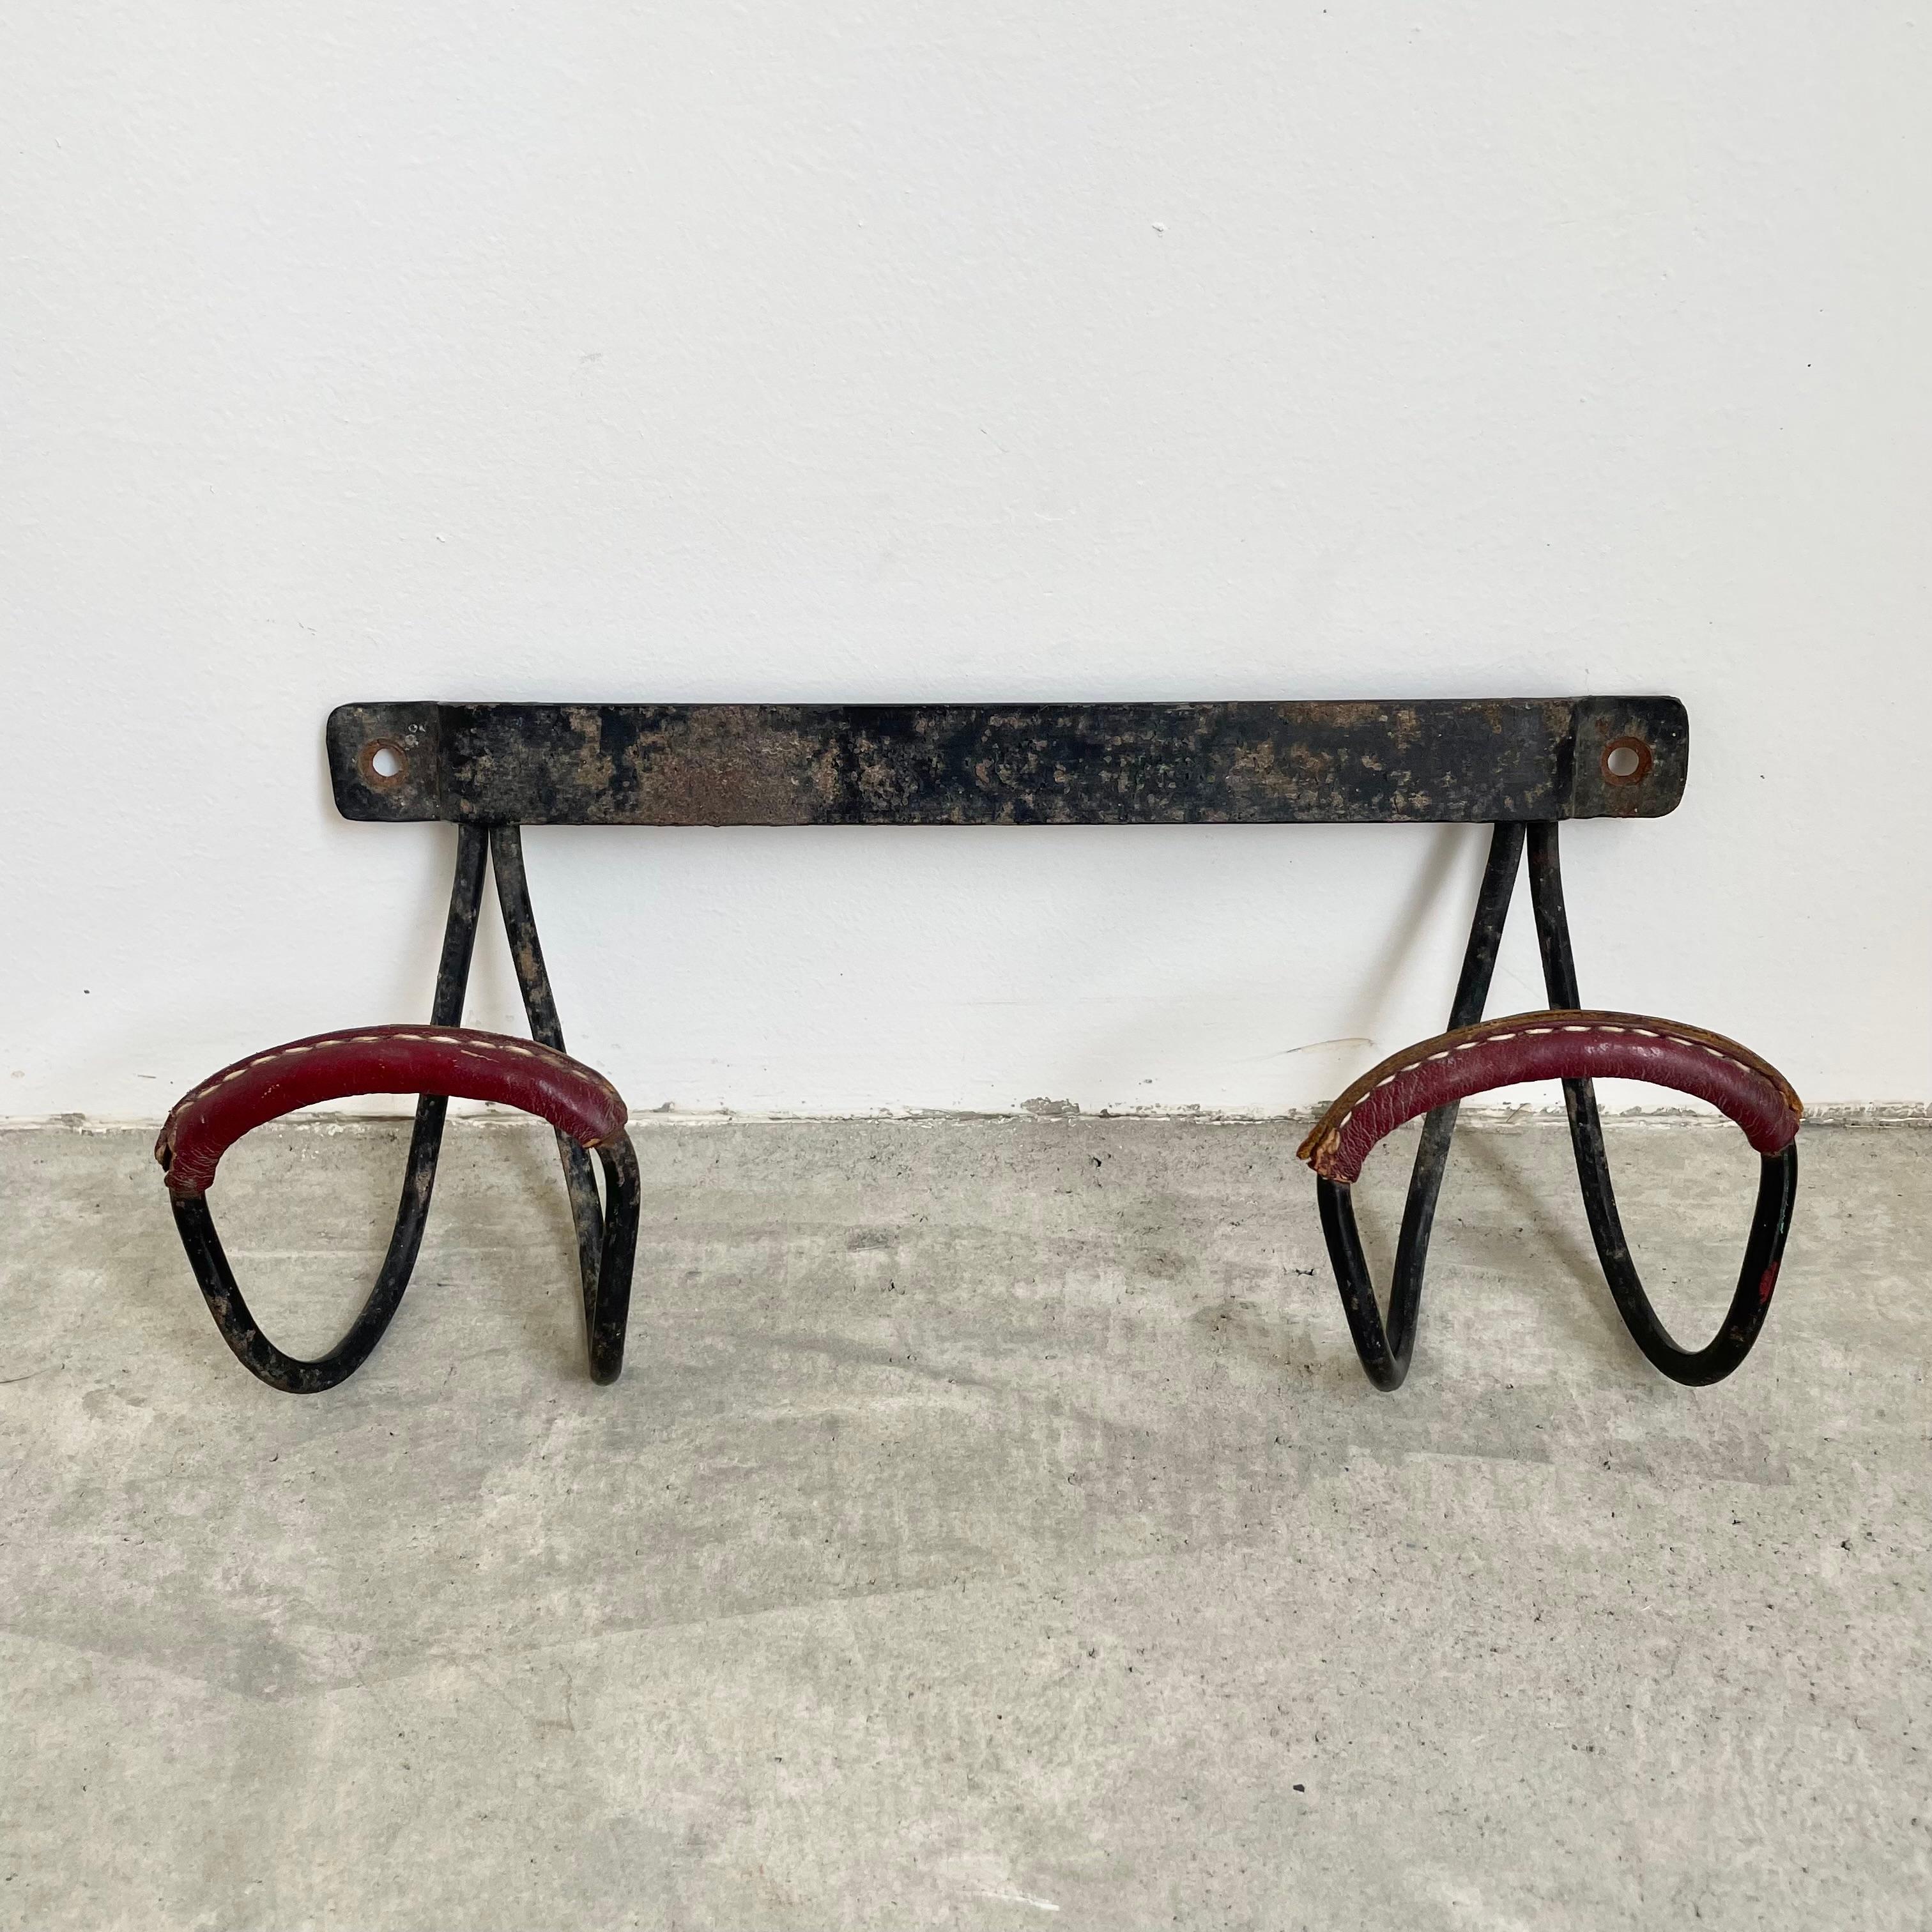 Handsome wall rack by French designer Jacques Adnet. Frame made of solid iron and features two large tongue hooks with red oxblood leather detailing on each hook. Signature Adnet contrast stitching. Good vintage condition. Priced individually. 

